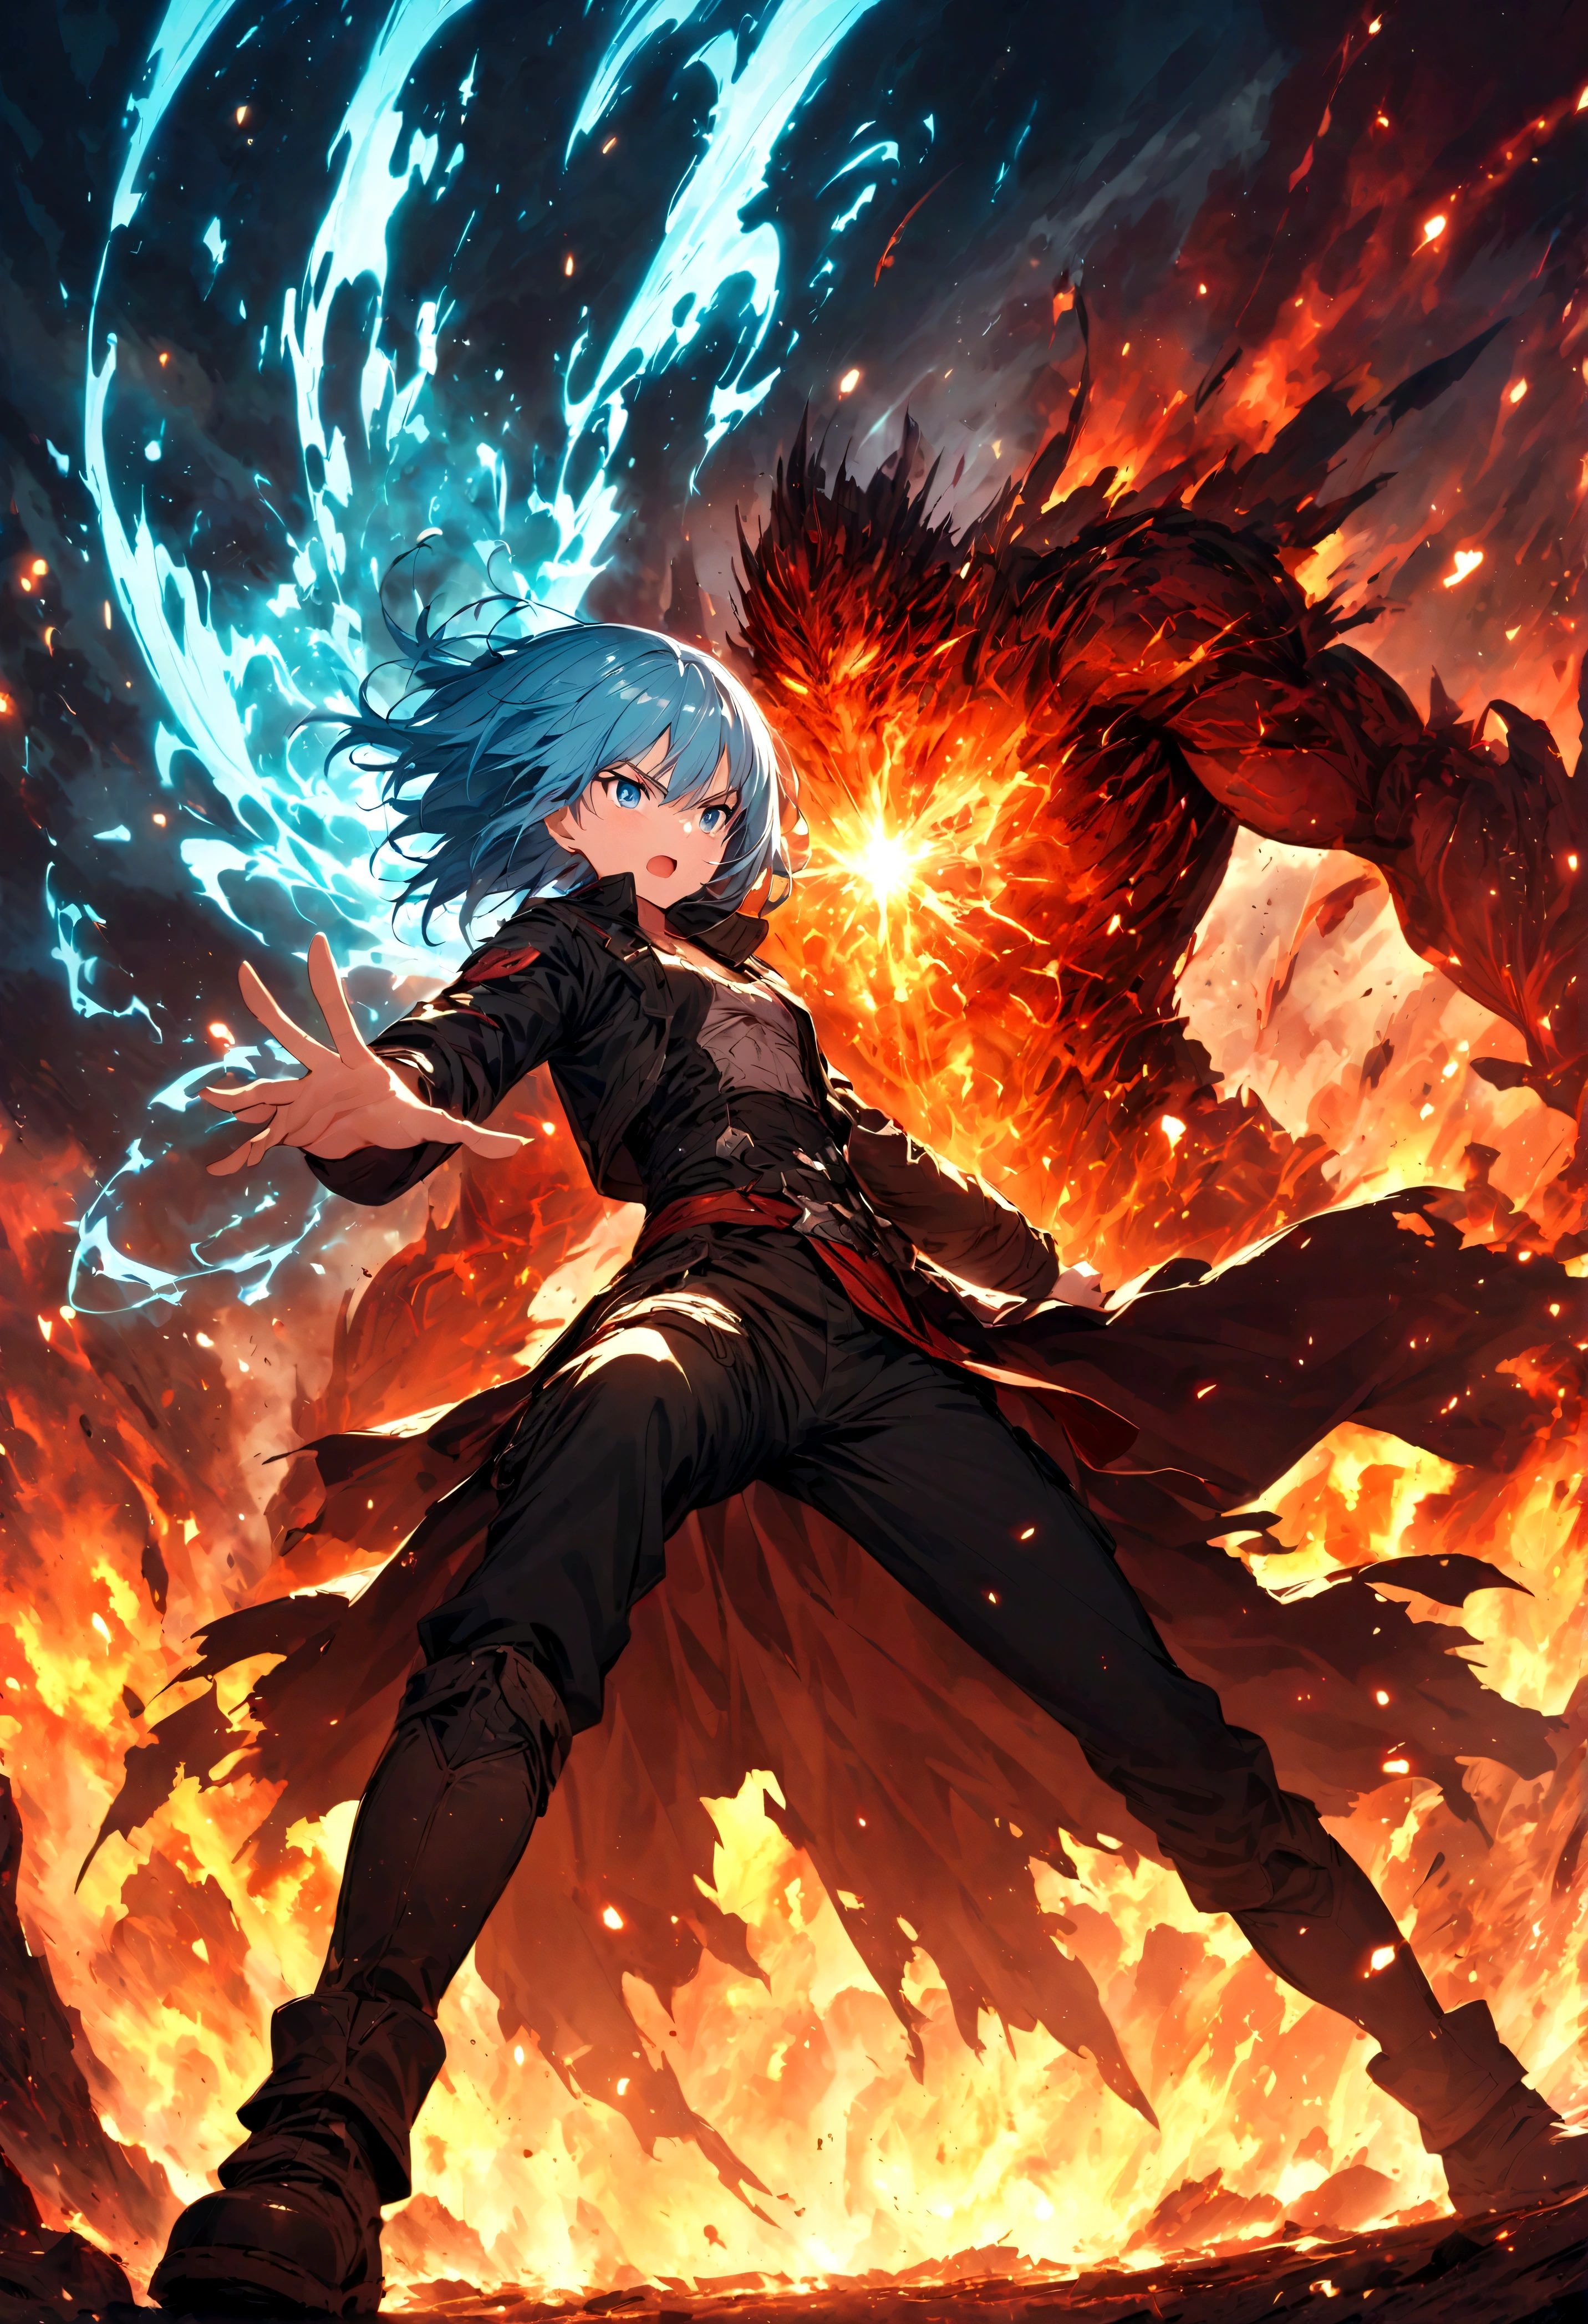 Rimuru Tempest,Create an action-packed battle scene featuring Rimuru Tempest from the manga and anime 'That Time I Got Reincarnated as a Slime'. Rimuru has blue hair and blue eyes, dressed in a stylish battle outfit like a black coat and boots. Capture him in a dynamic combat pose, perhaps casting a powerful spell or confronting an enemy, with a confident and determined expression. The background should depict a grand battlefield in a fantasy world, filled with magical effects and a war-torn landscape. Include intense special effects such as bursts of light, energy waves, and wind to emphasize the power of his magic. Highlight his aura and any transformation abilities, such as parts of his body showing his slime form. The scene should convey the intensity and drama of an epic battle.